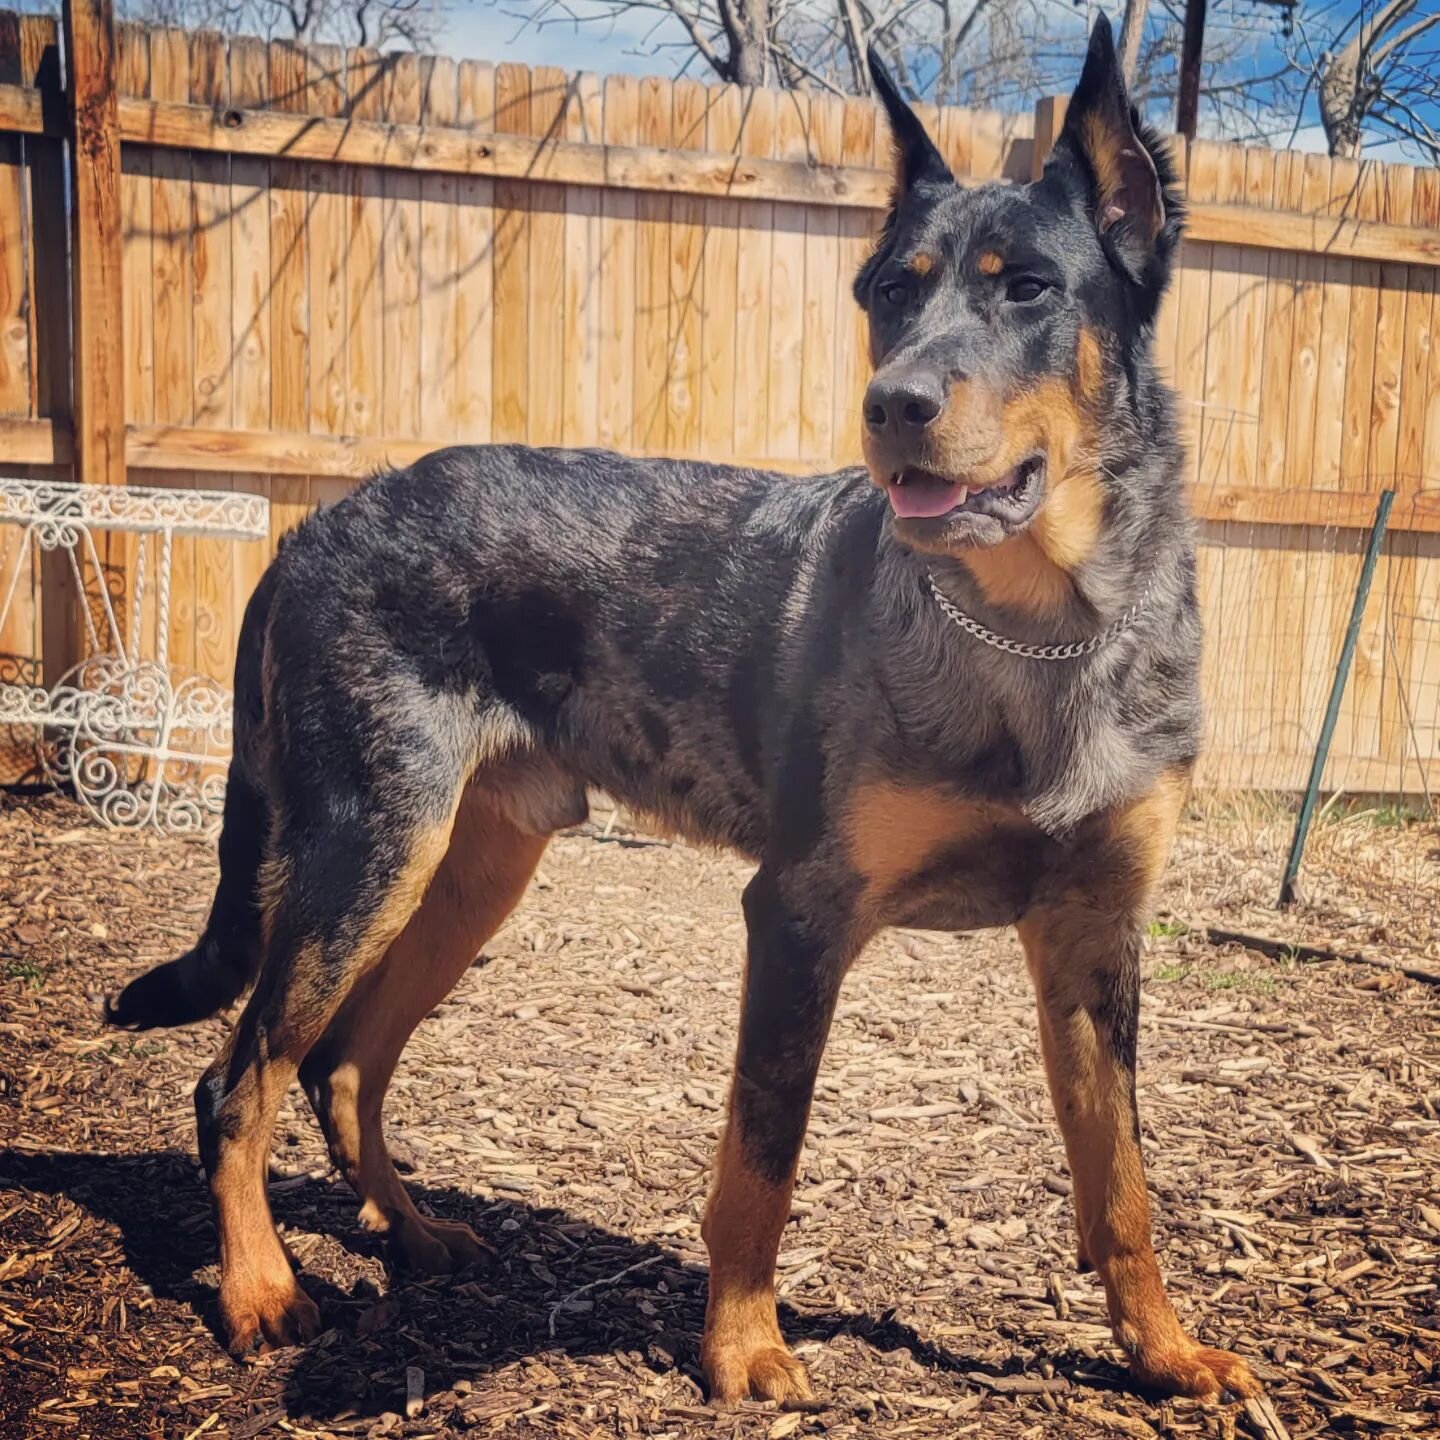 I had been waiting over 16 years to get a Beauceron.  I had the money saved multiple years in that time, only to have various challenges force me to use it for other purposes.  I now know it was fate making sure I got the Beauceron of my dreams!  Tor